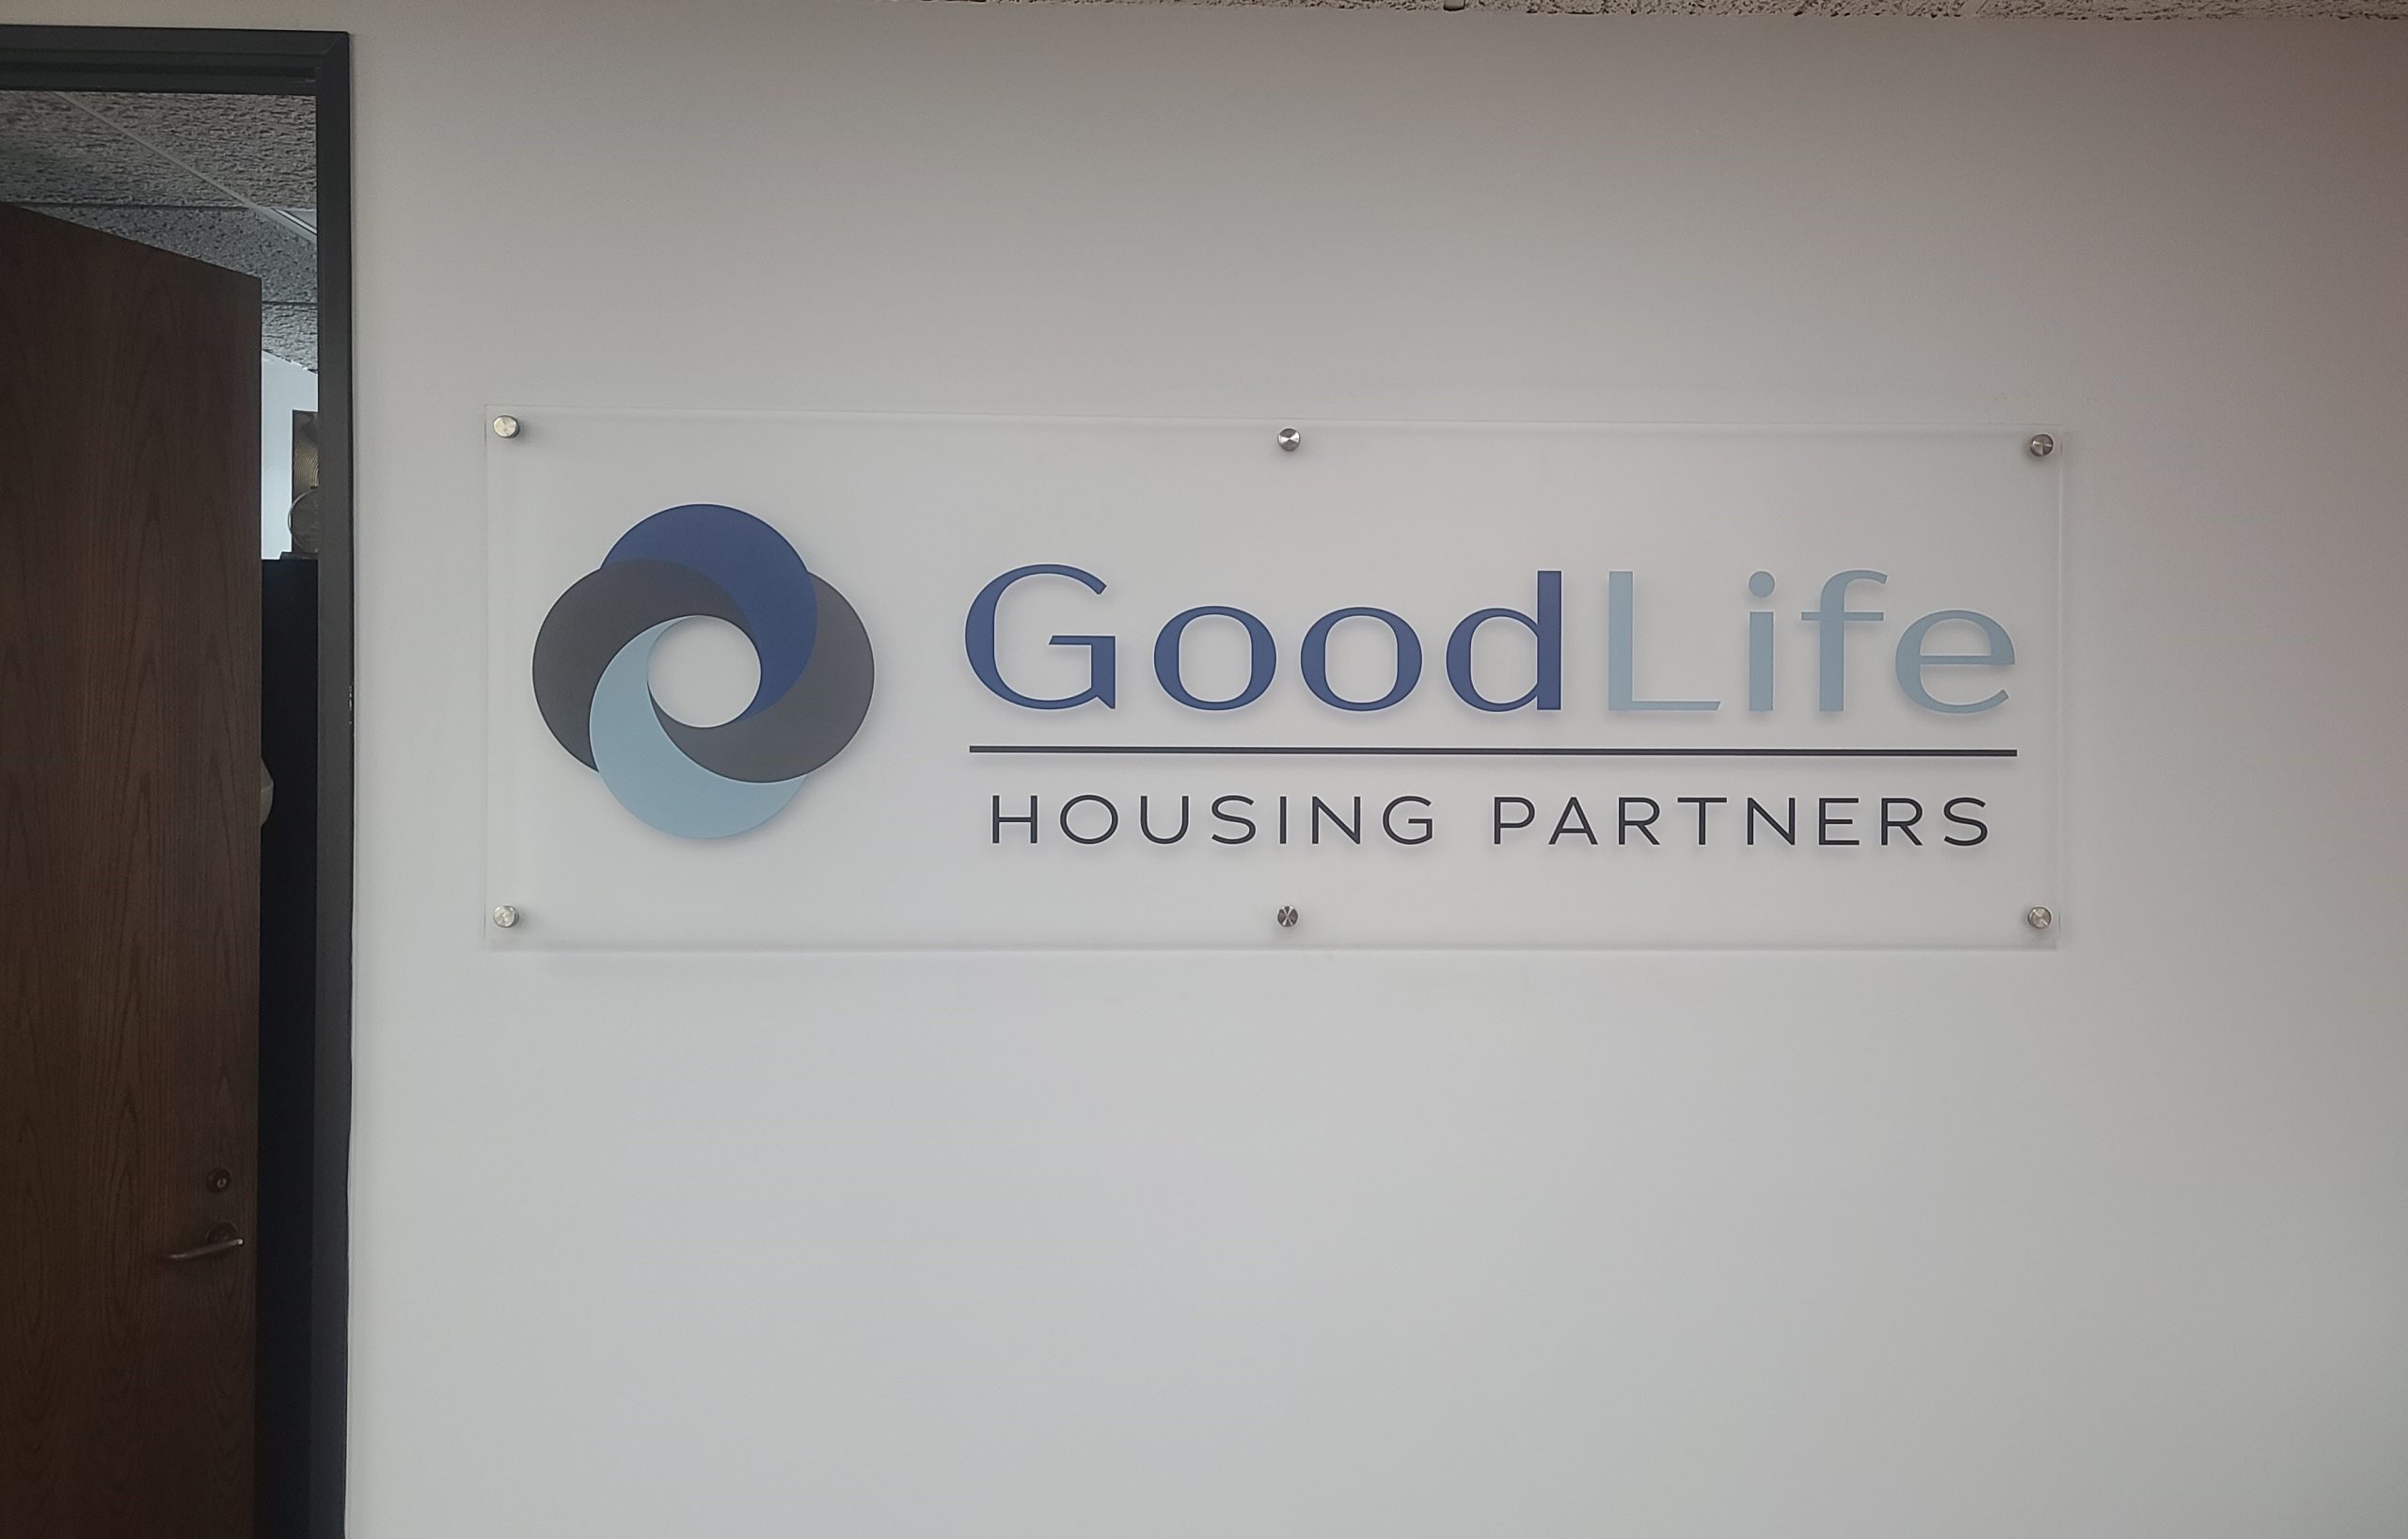 With this acrylic panel lobby sign for their Downtown Los Angeles office, GoodLife Housing will definitely impress those visiting their workplace.